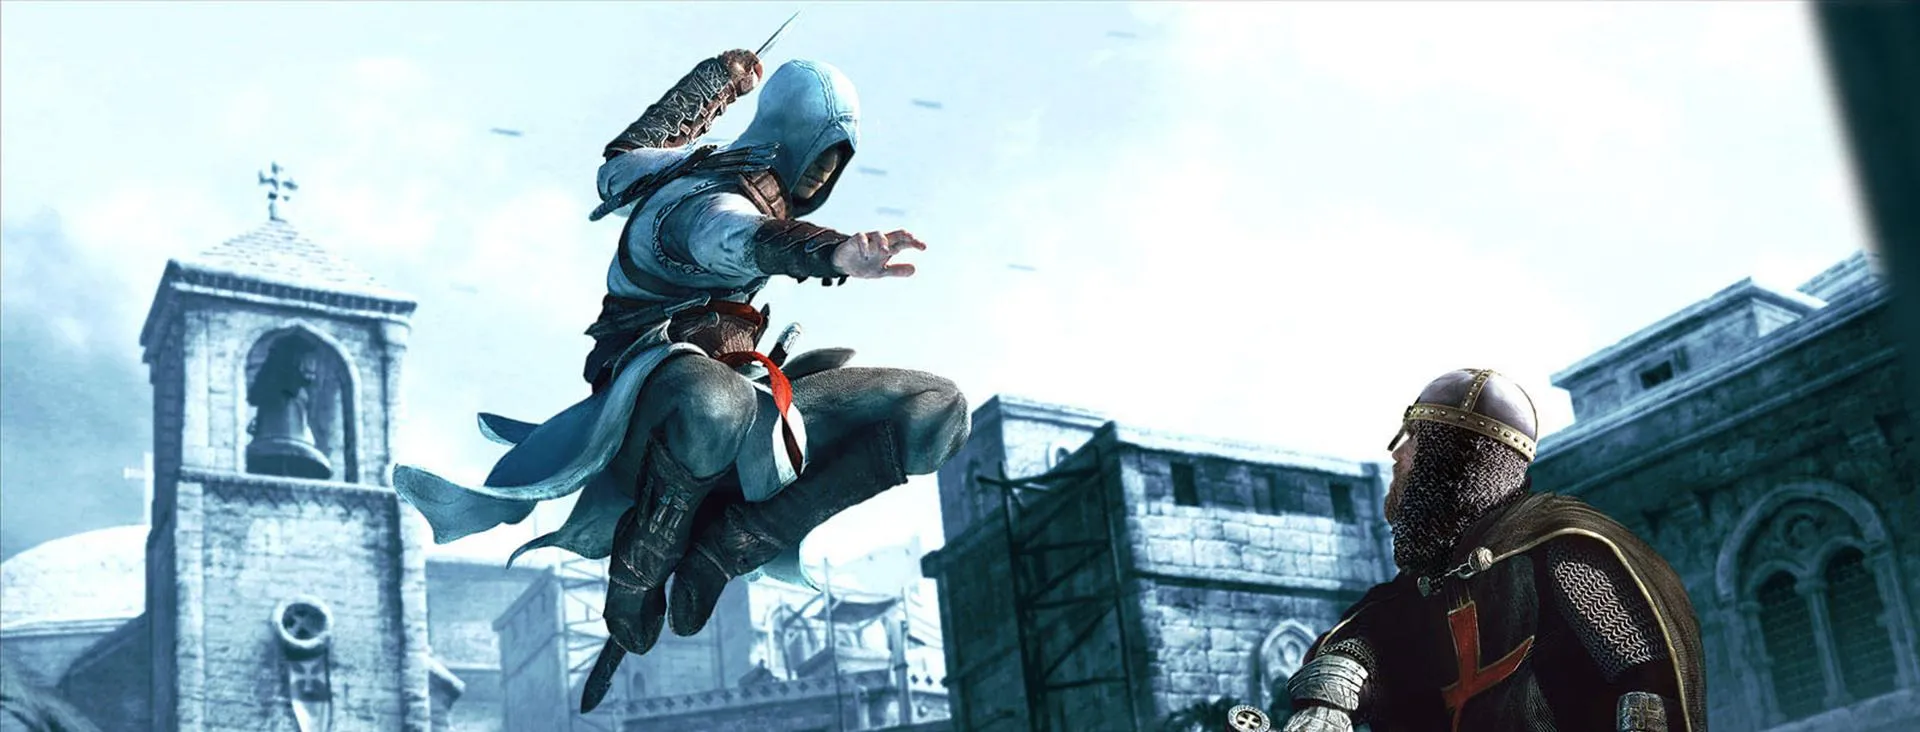 Assassin's Creed: Remake™ 